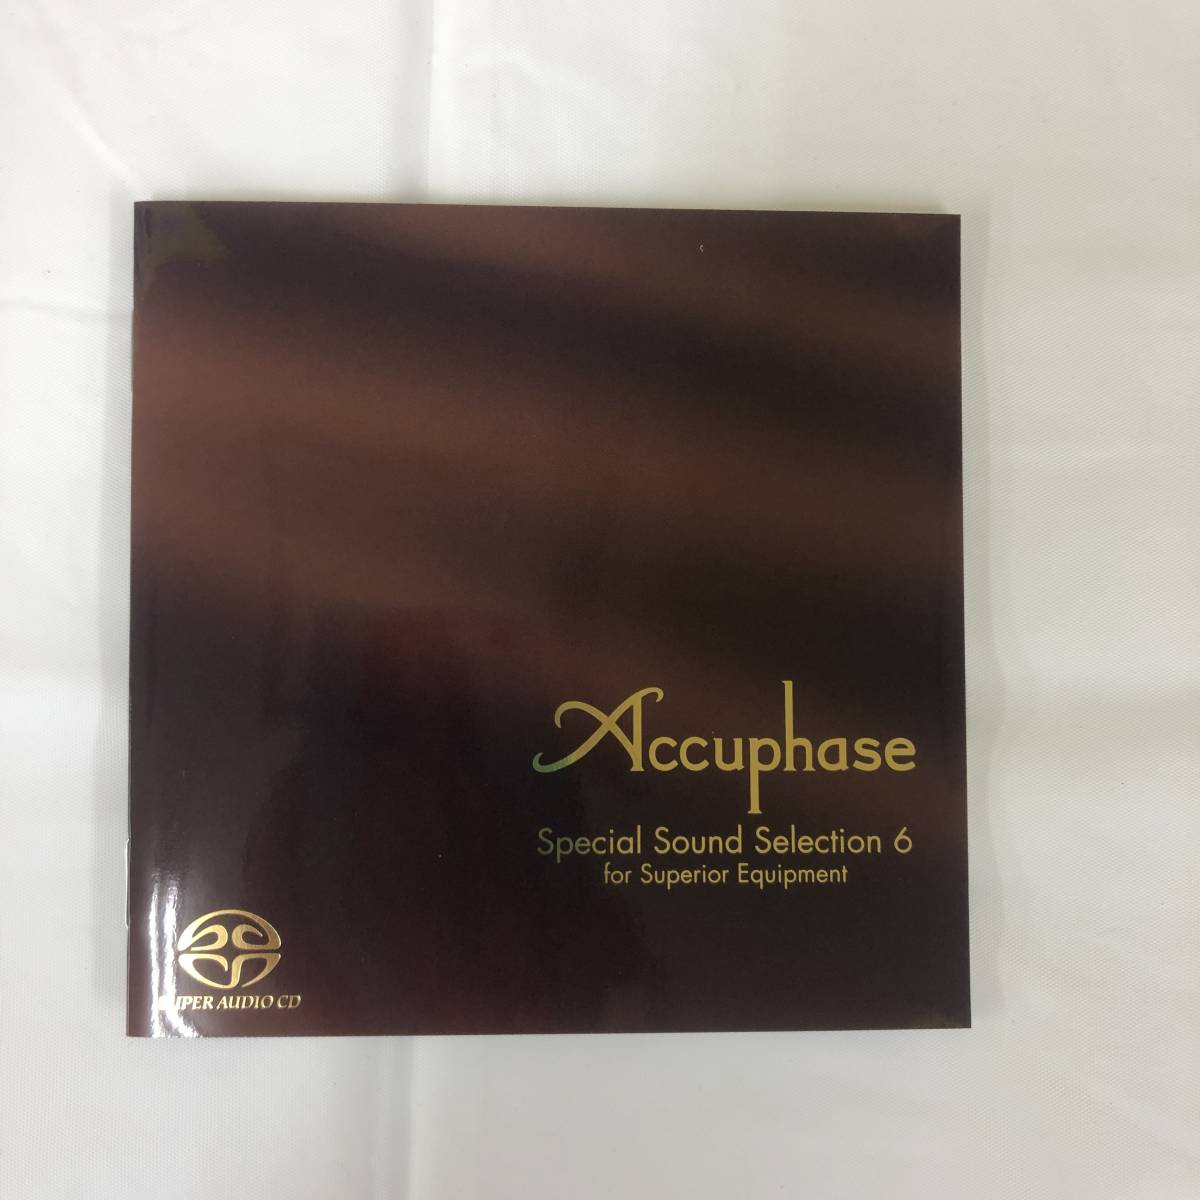 Accuphase Special Sound Selection